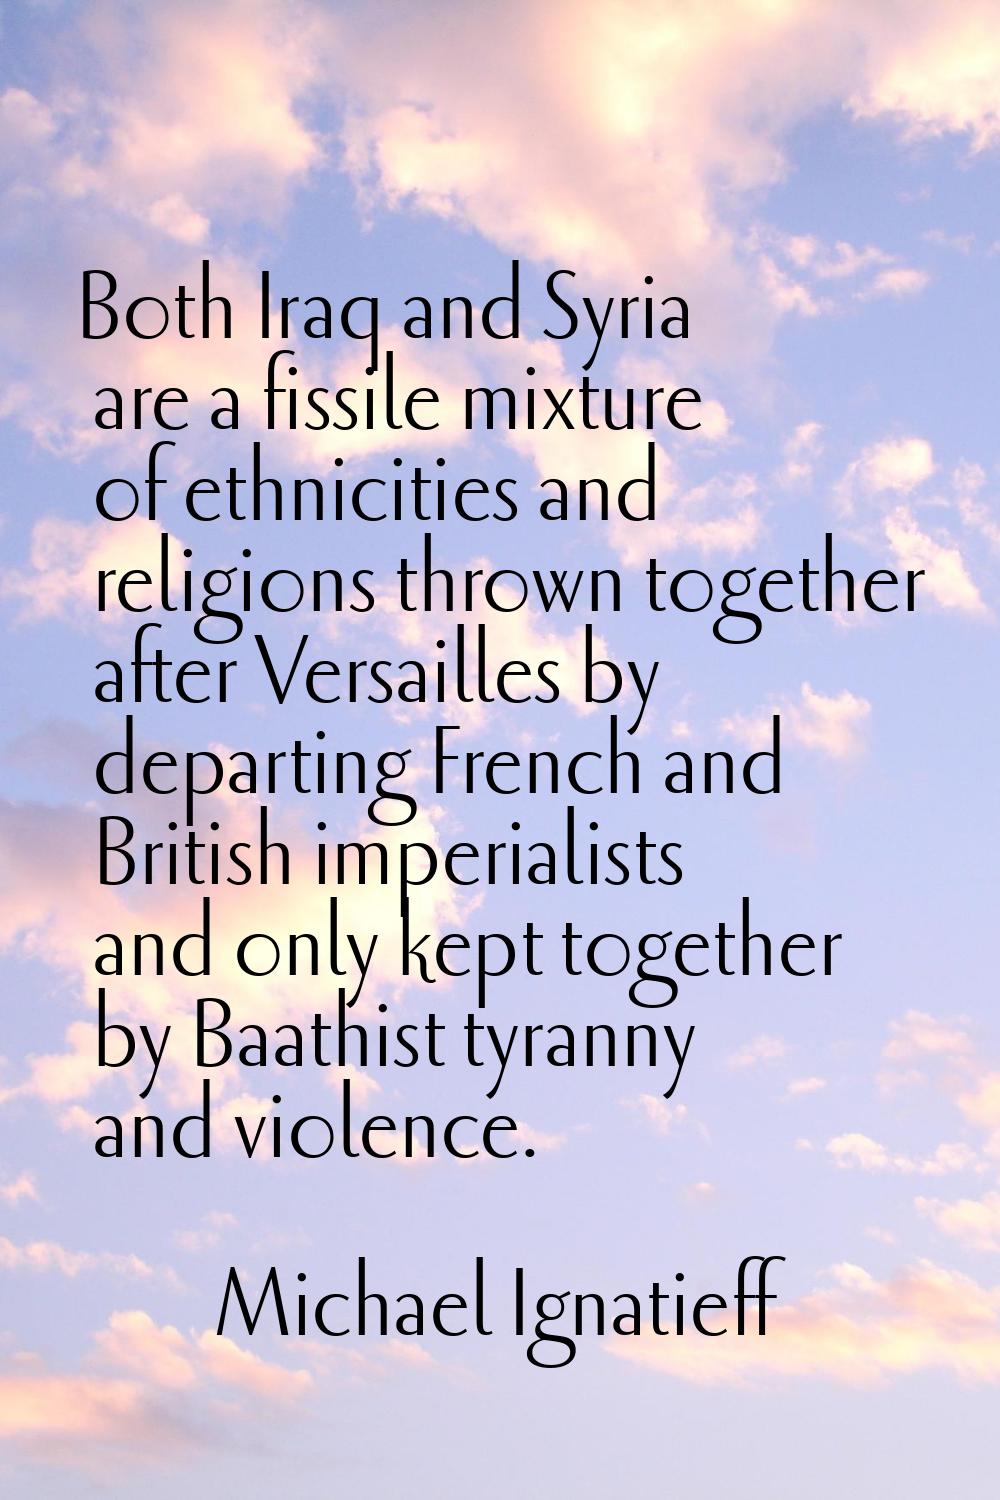 Both Iraq and Syria are a fissile mixture of ethnicities and religions thrown together after Versai